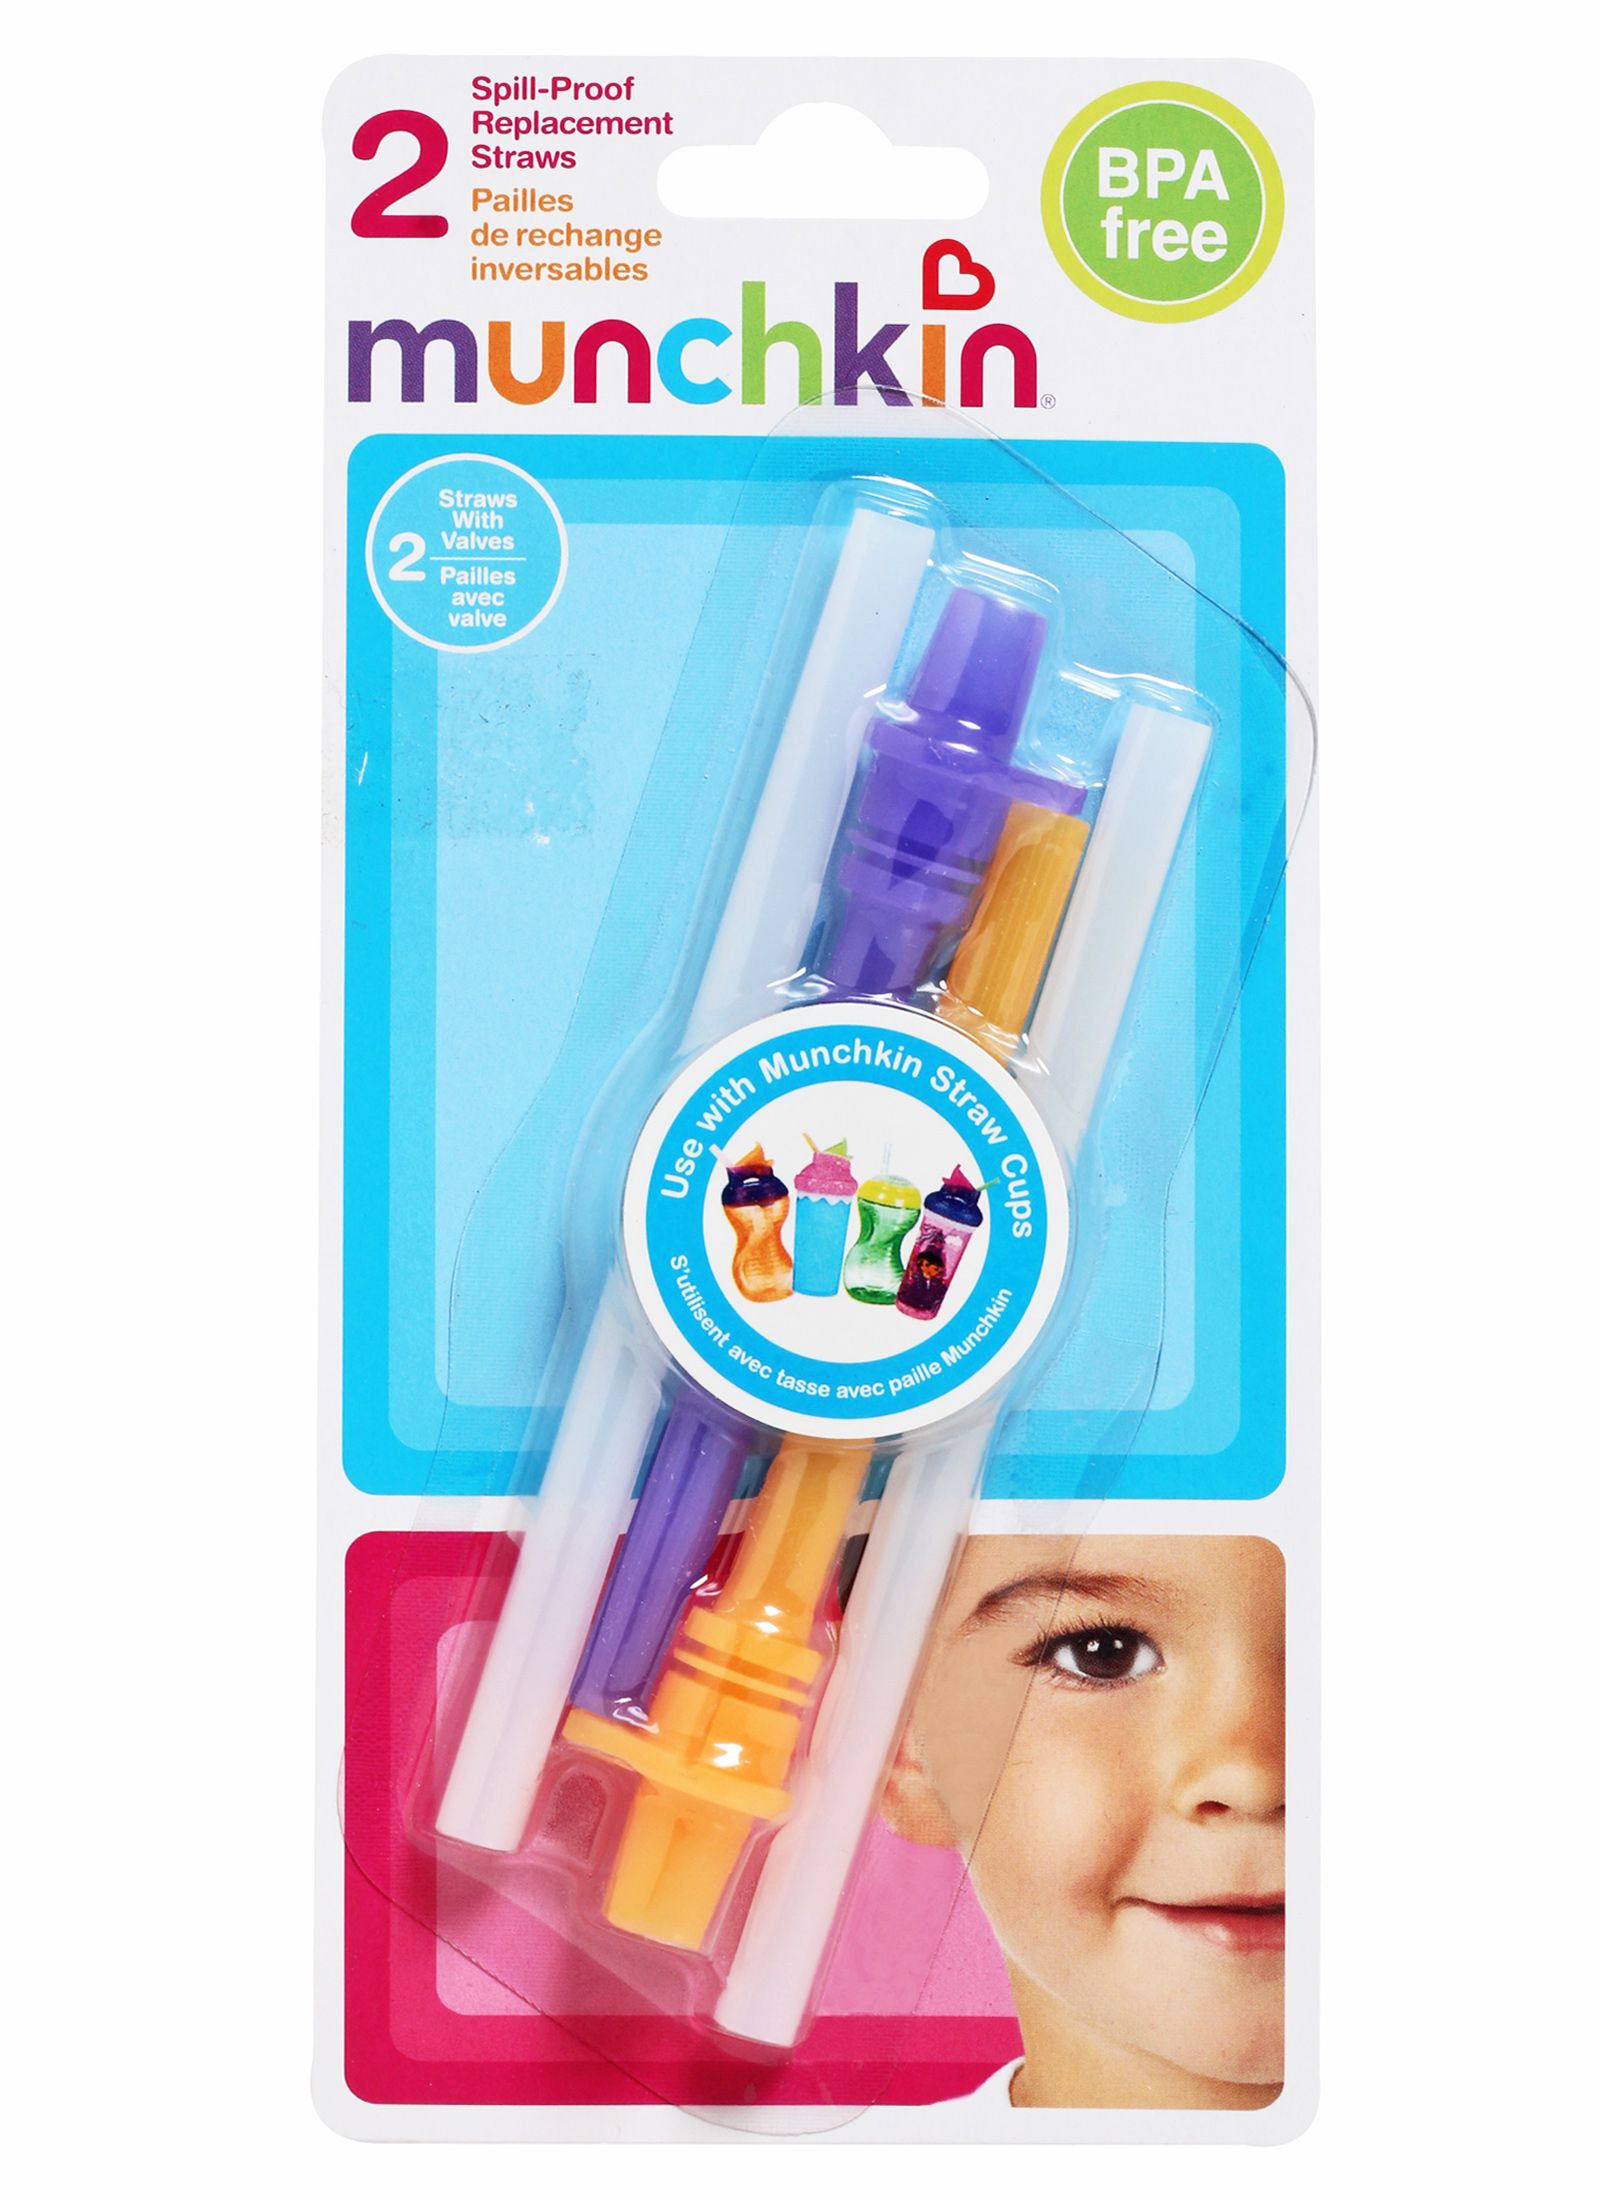 Munchkin - Spill-proof Replacement Straws